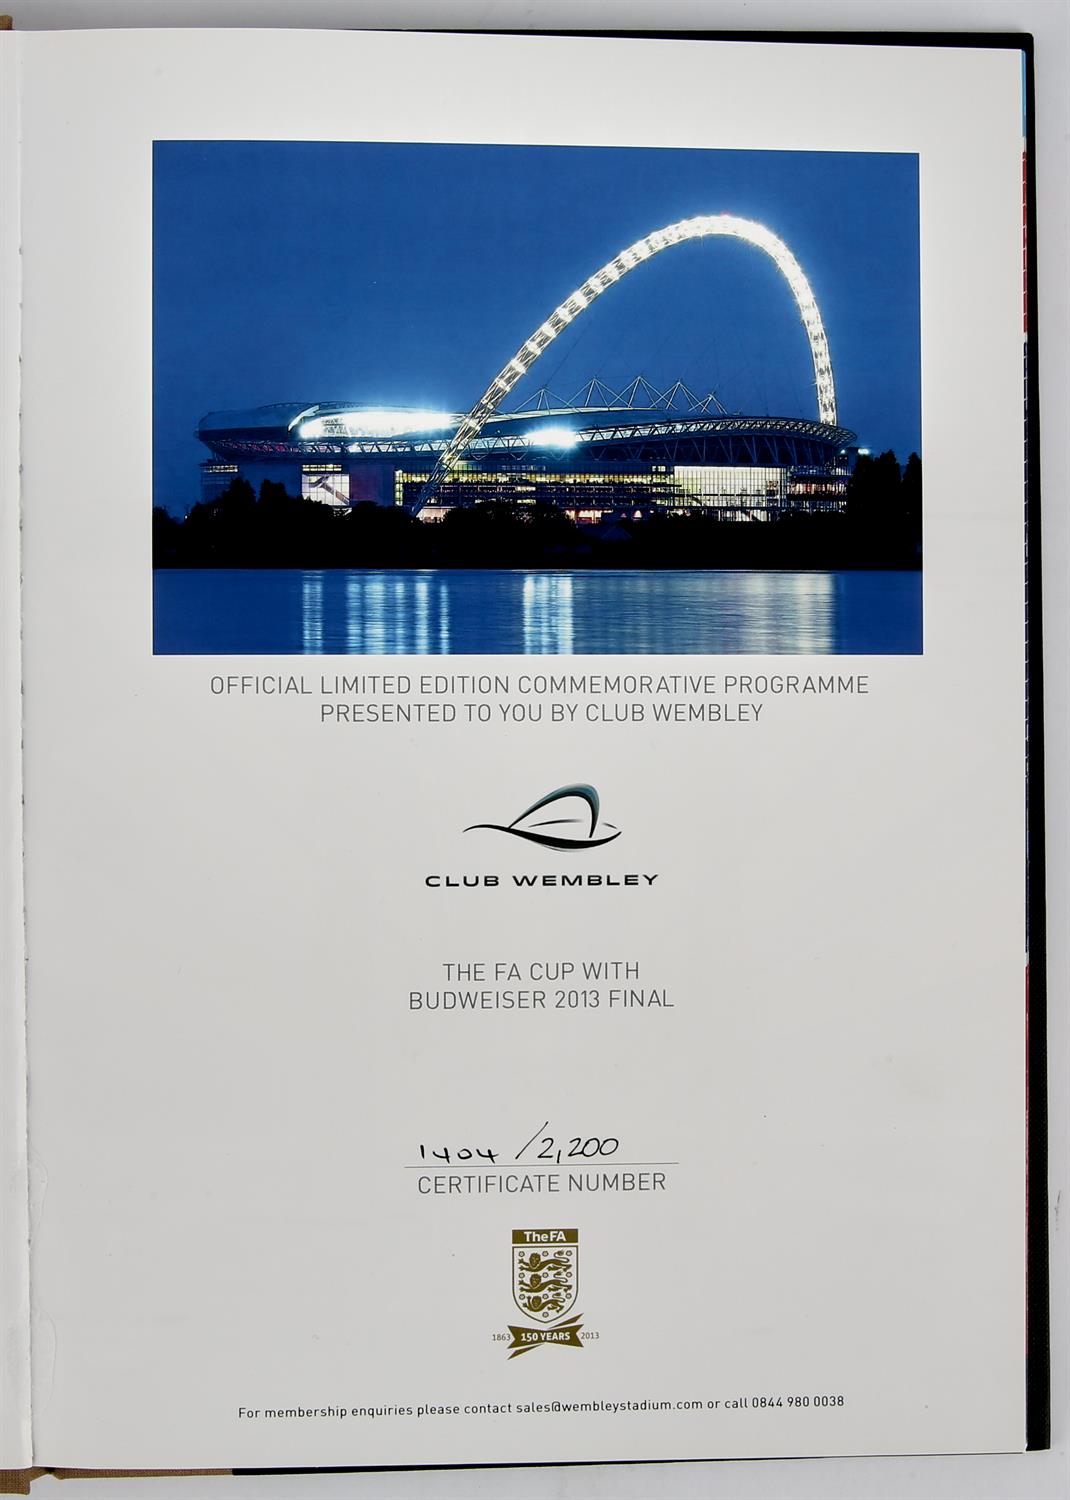 150 years of the FA - Special FA Cup with Budweiser 2013 Final Book - Manchester City v Wigan - Image 2 of 3